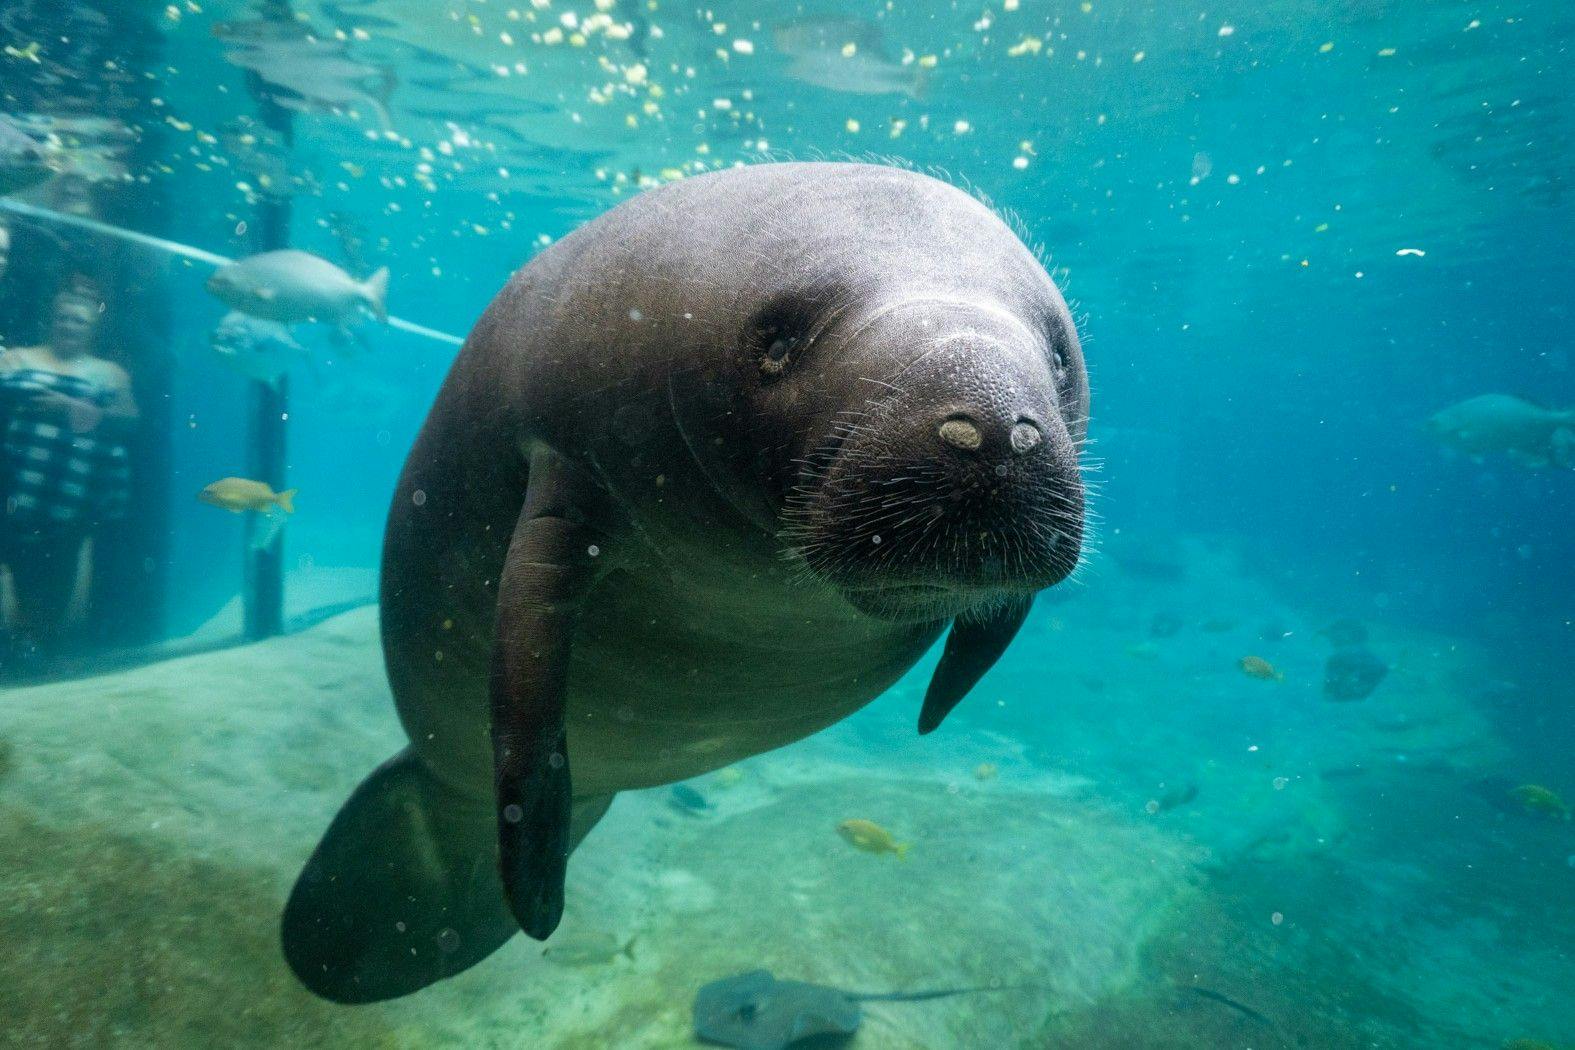 Record number of rehabilitated manatees returned to natural habitat in 1 day